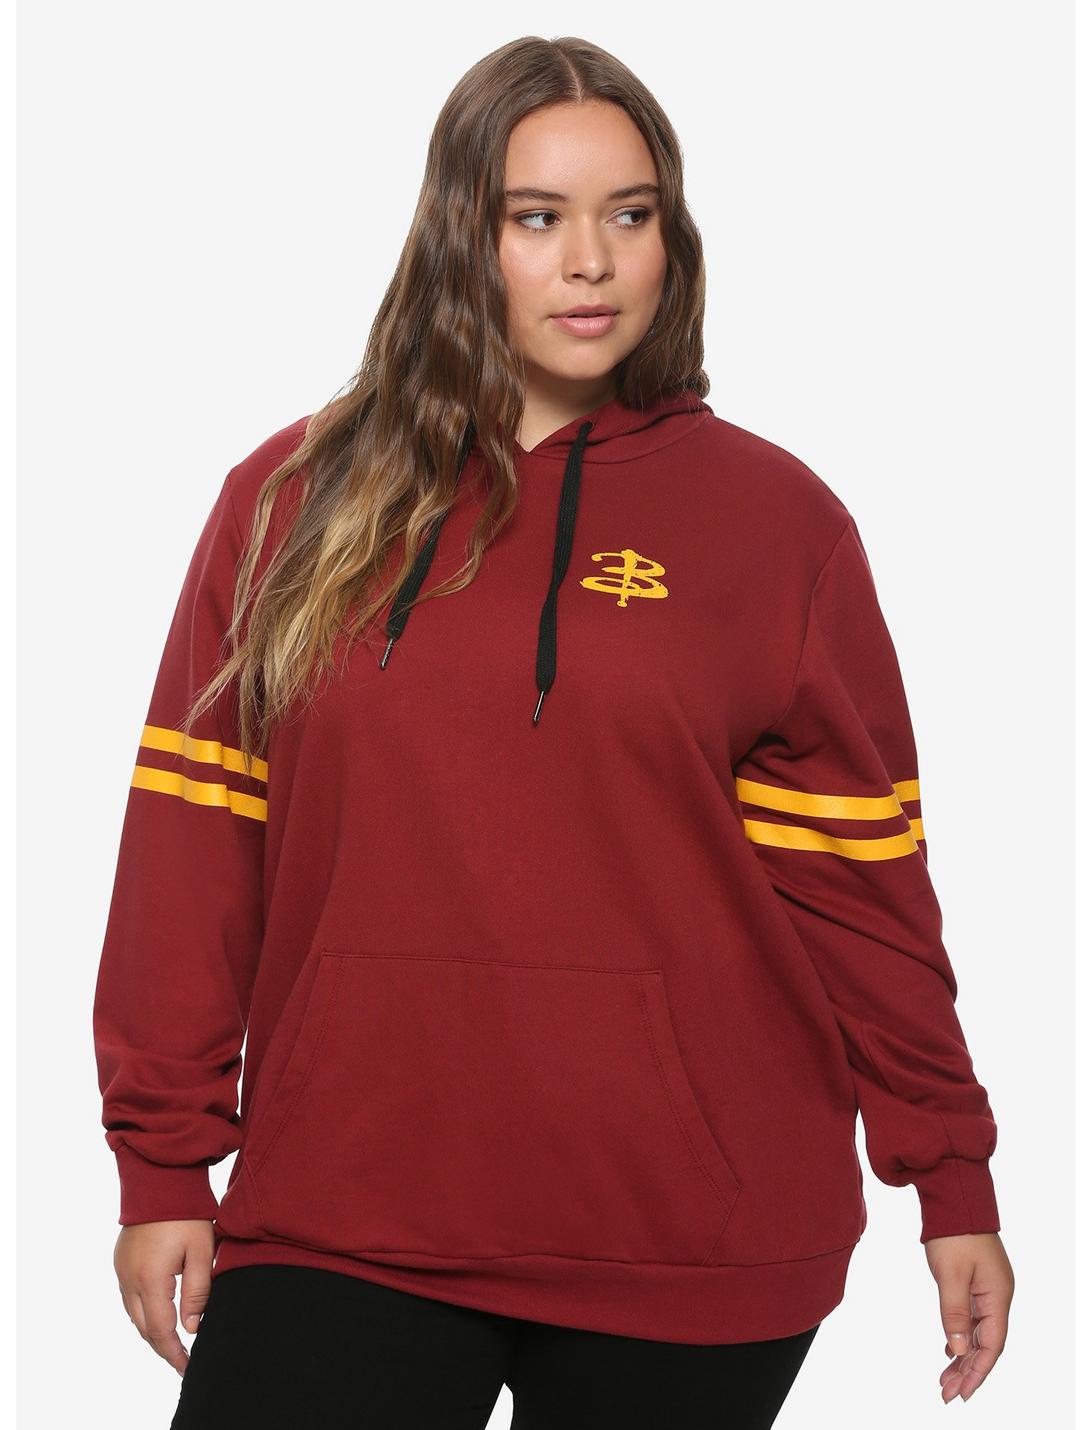 Buffy The Vampire Slayer Sunnydale Slayers Club Girls Athletic Hoodie Plus Size, YELLOW, hi-res